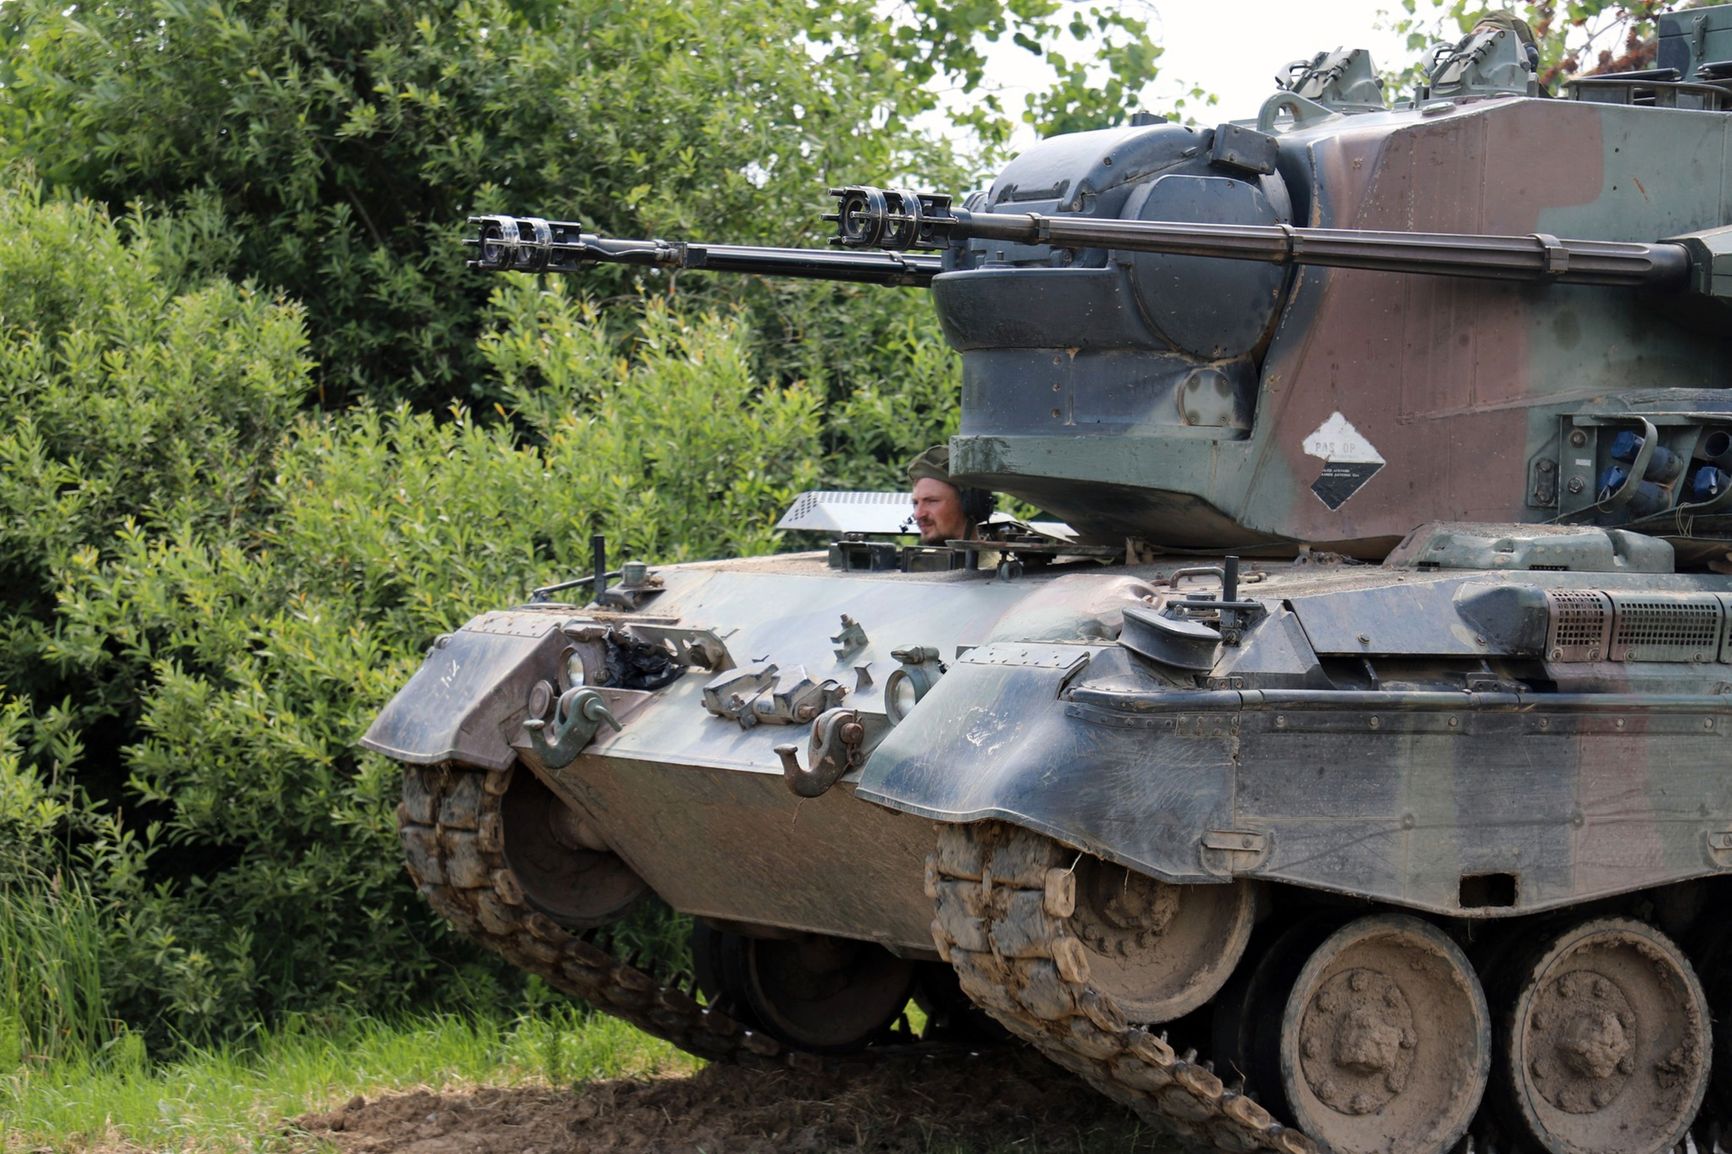 Dutch variant of the German Flakpanzer Gepard (nicknamed the 'Cheetah') in service with the Armed Forces of Ukraine